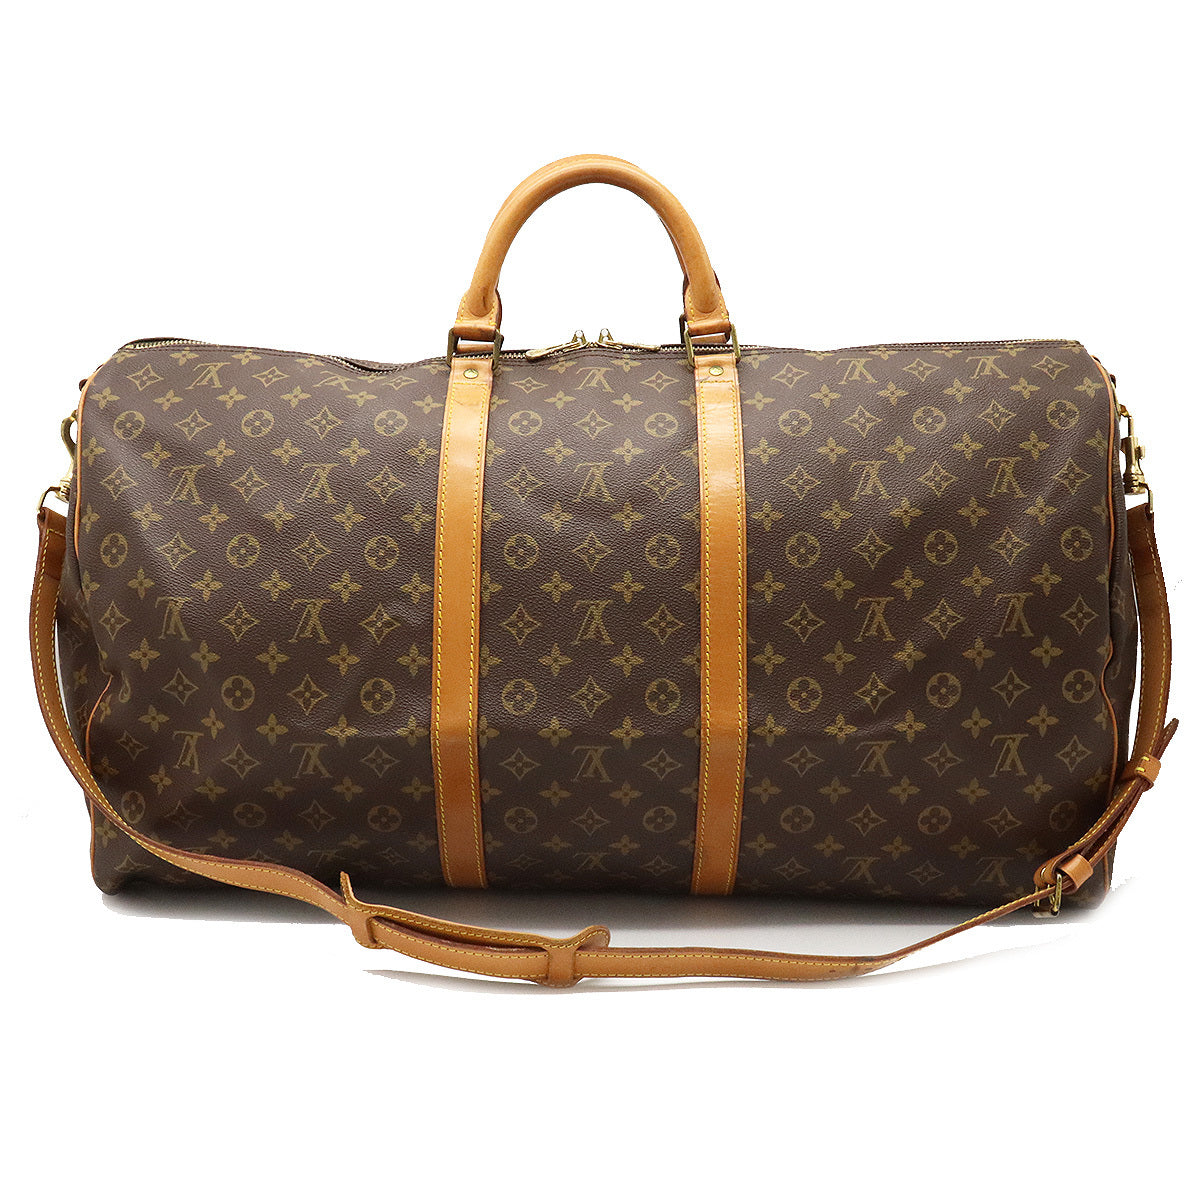 Monogram Bandouliere Keepall 55 Duffle (Authentic Pre-Owned)